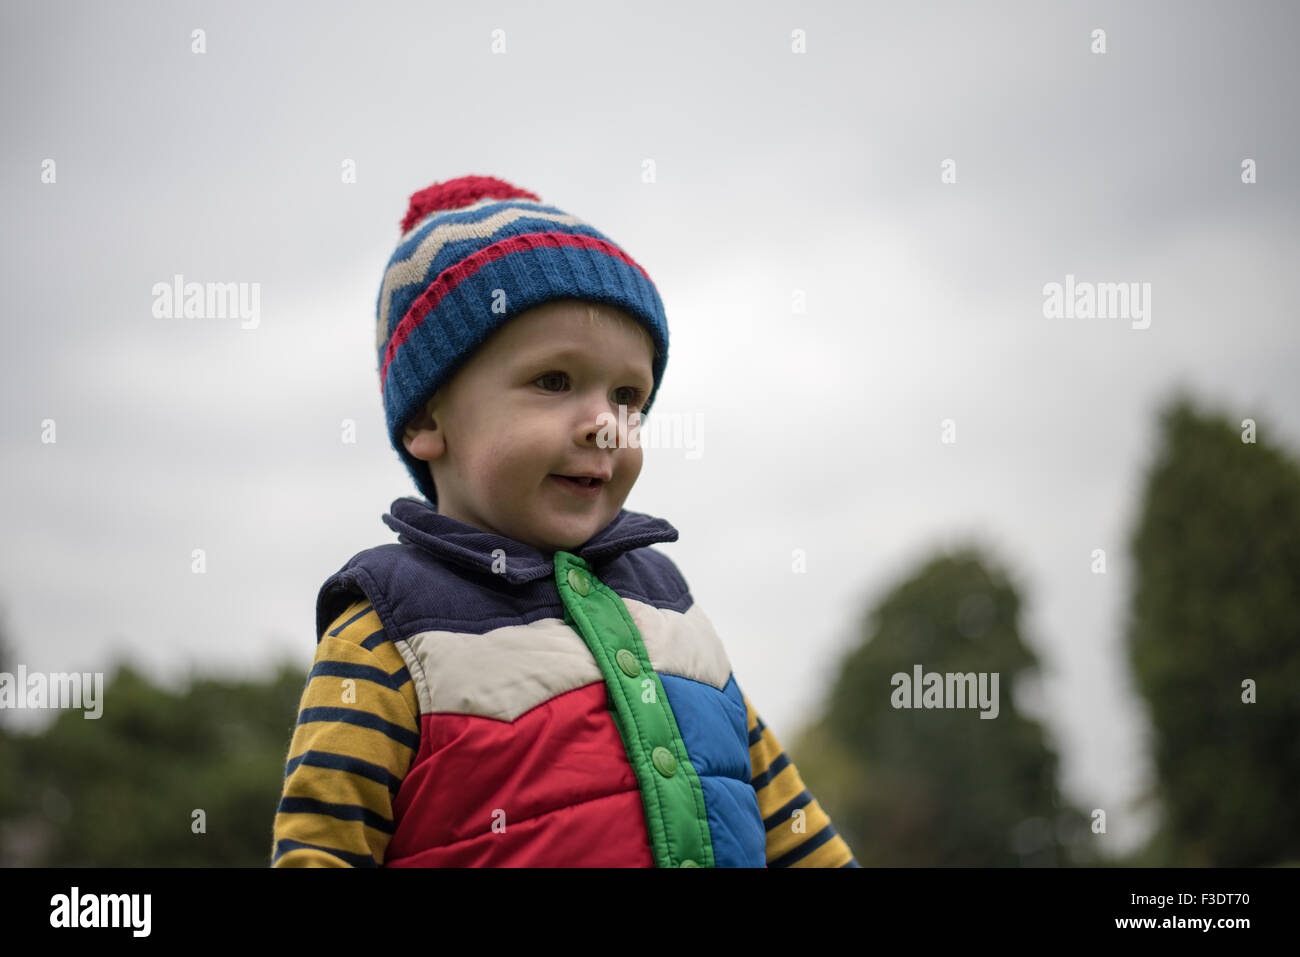 Cheeky boy smiling in Park Stock Photo